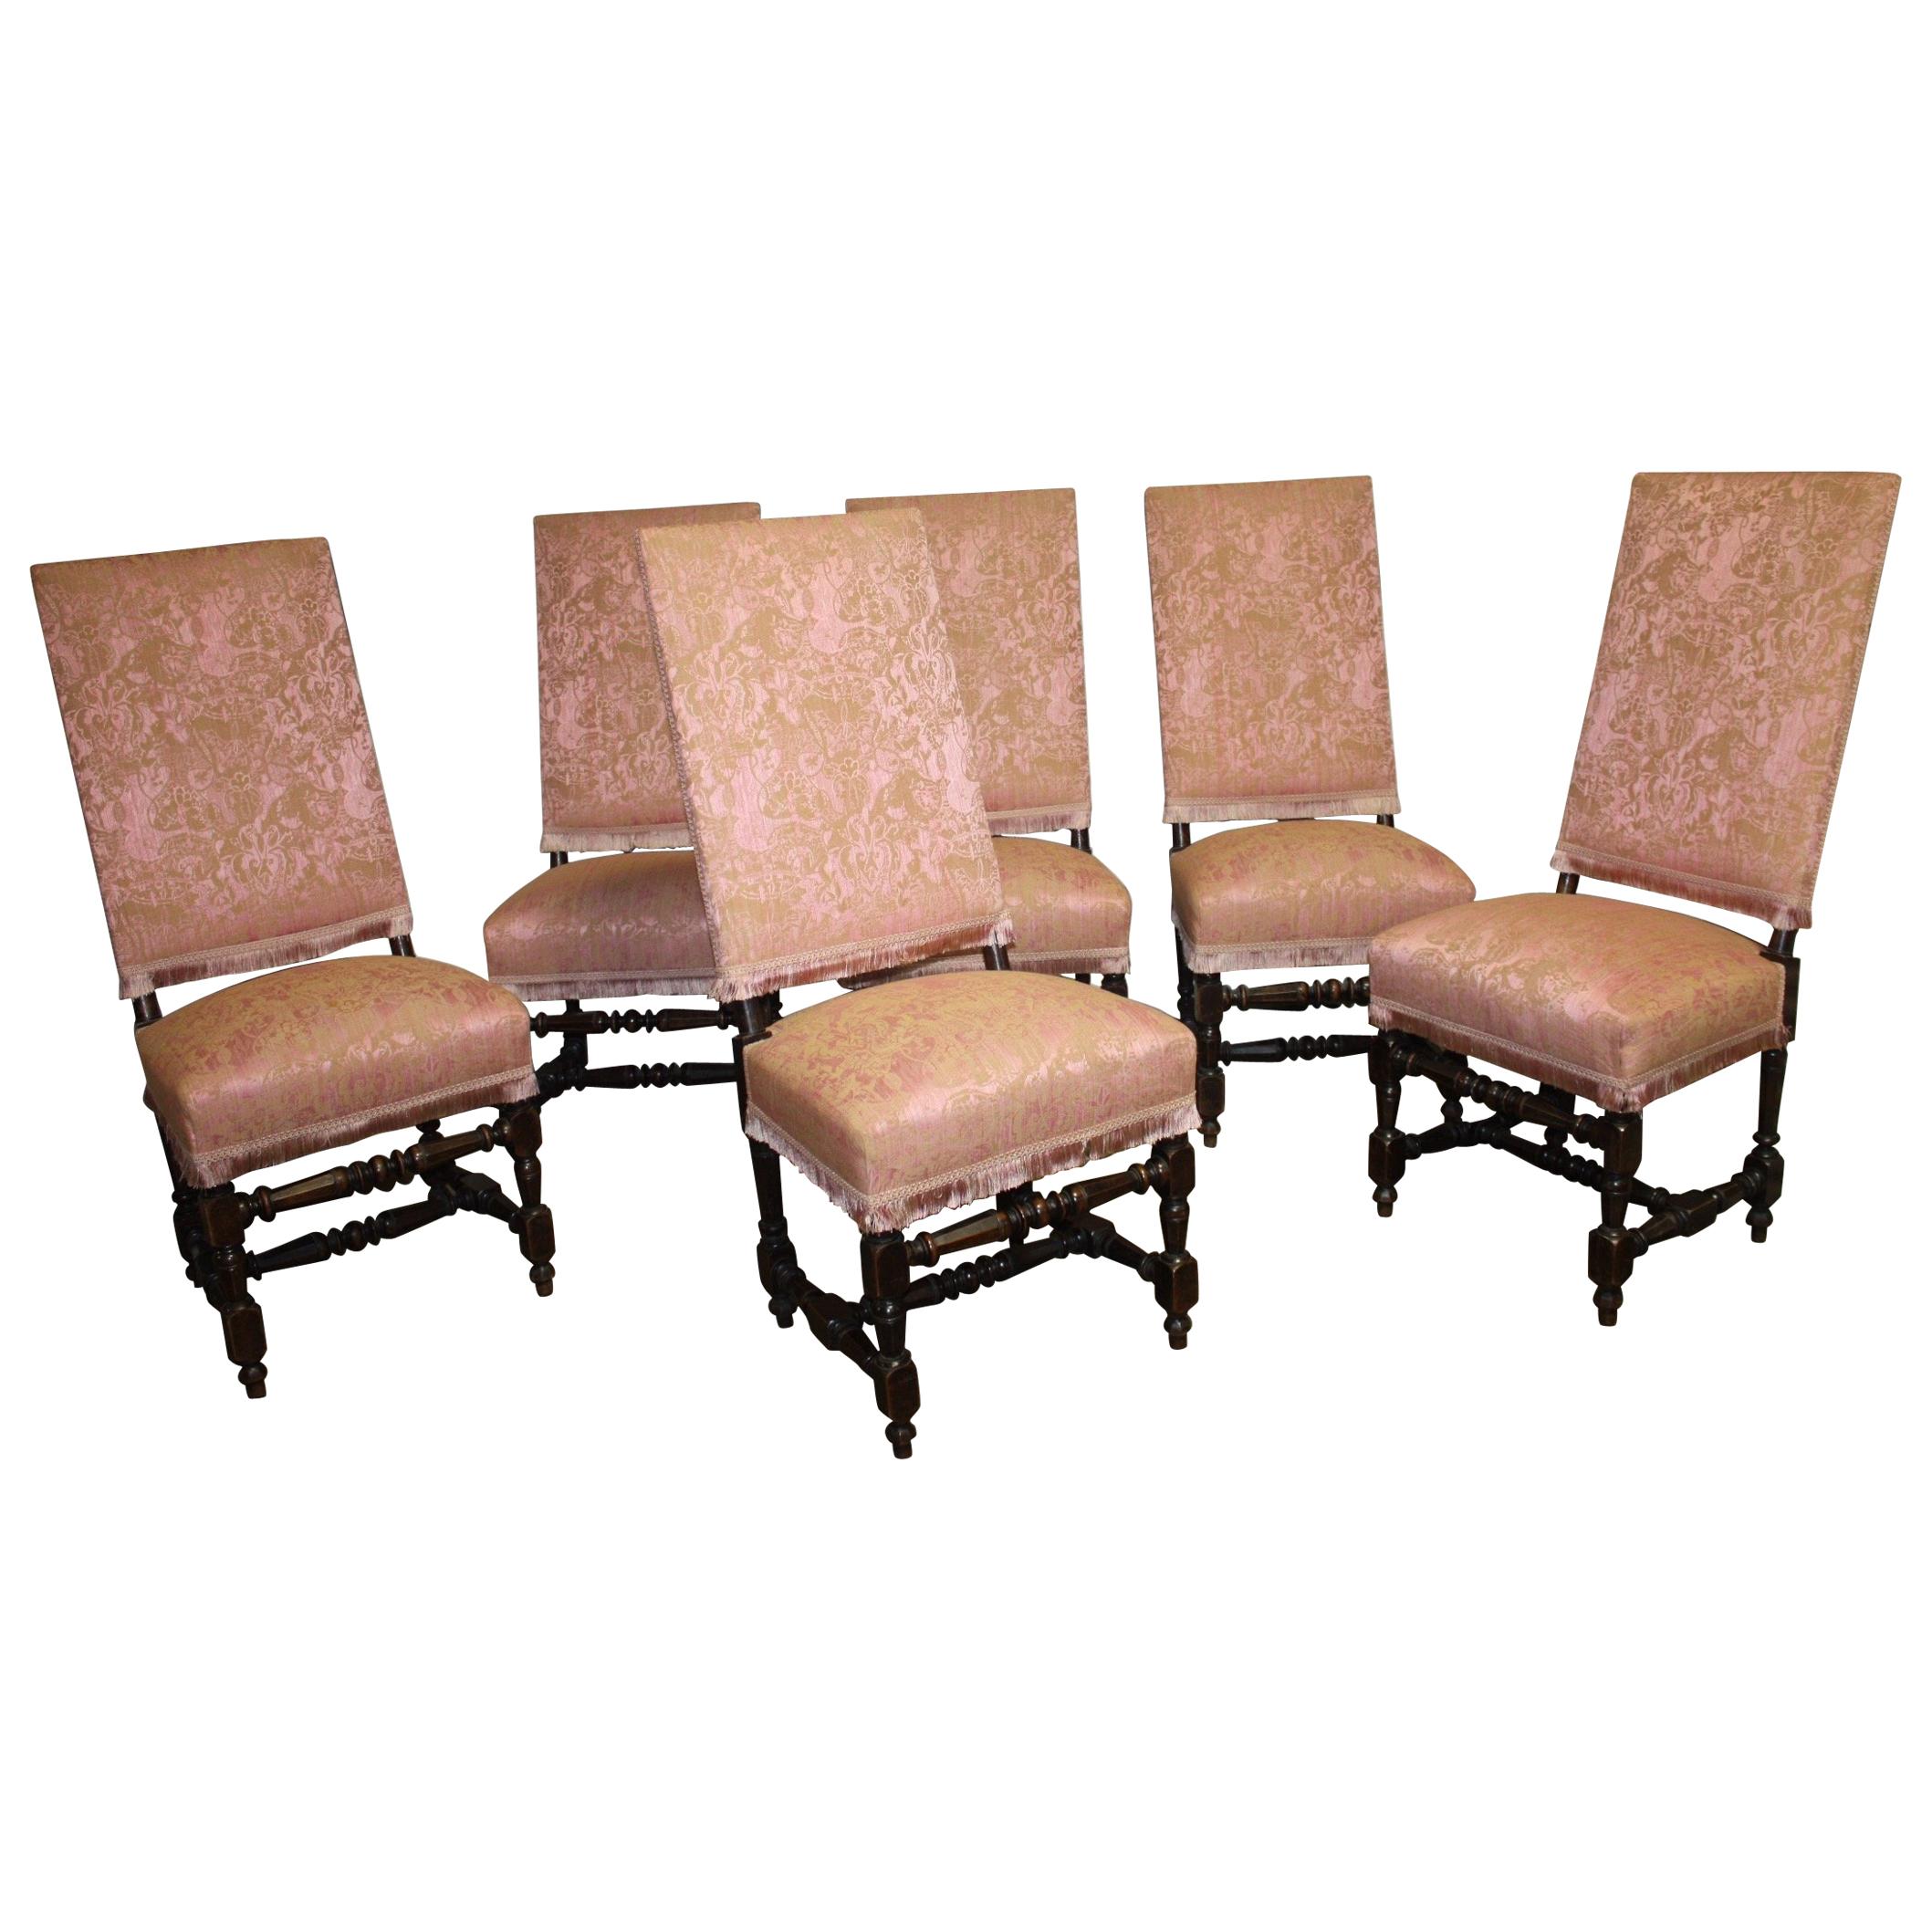 Set of French 19th Century Dining Room Chairs